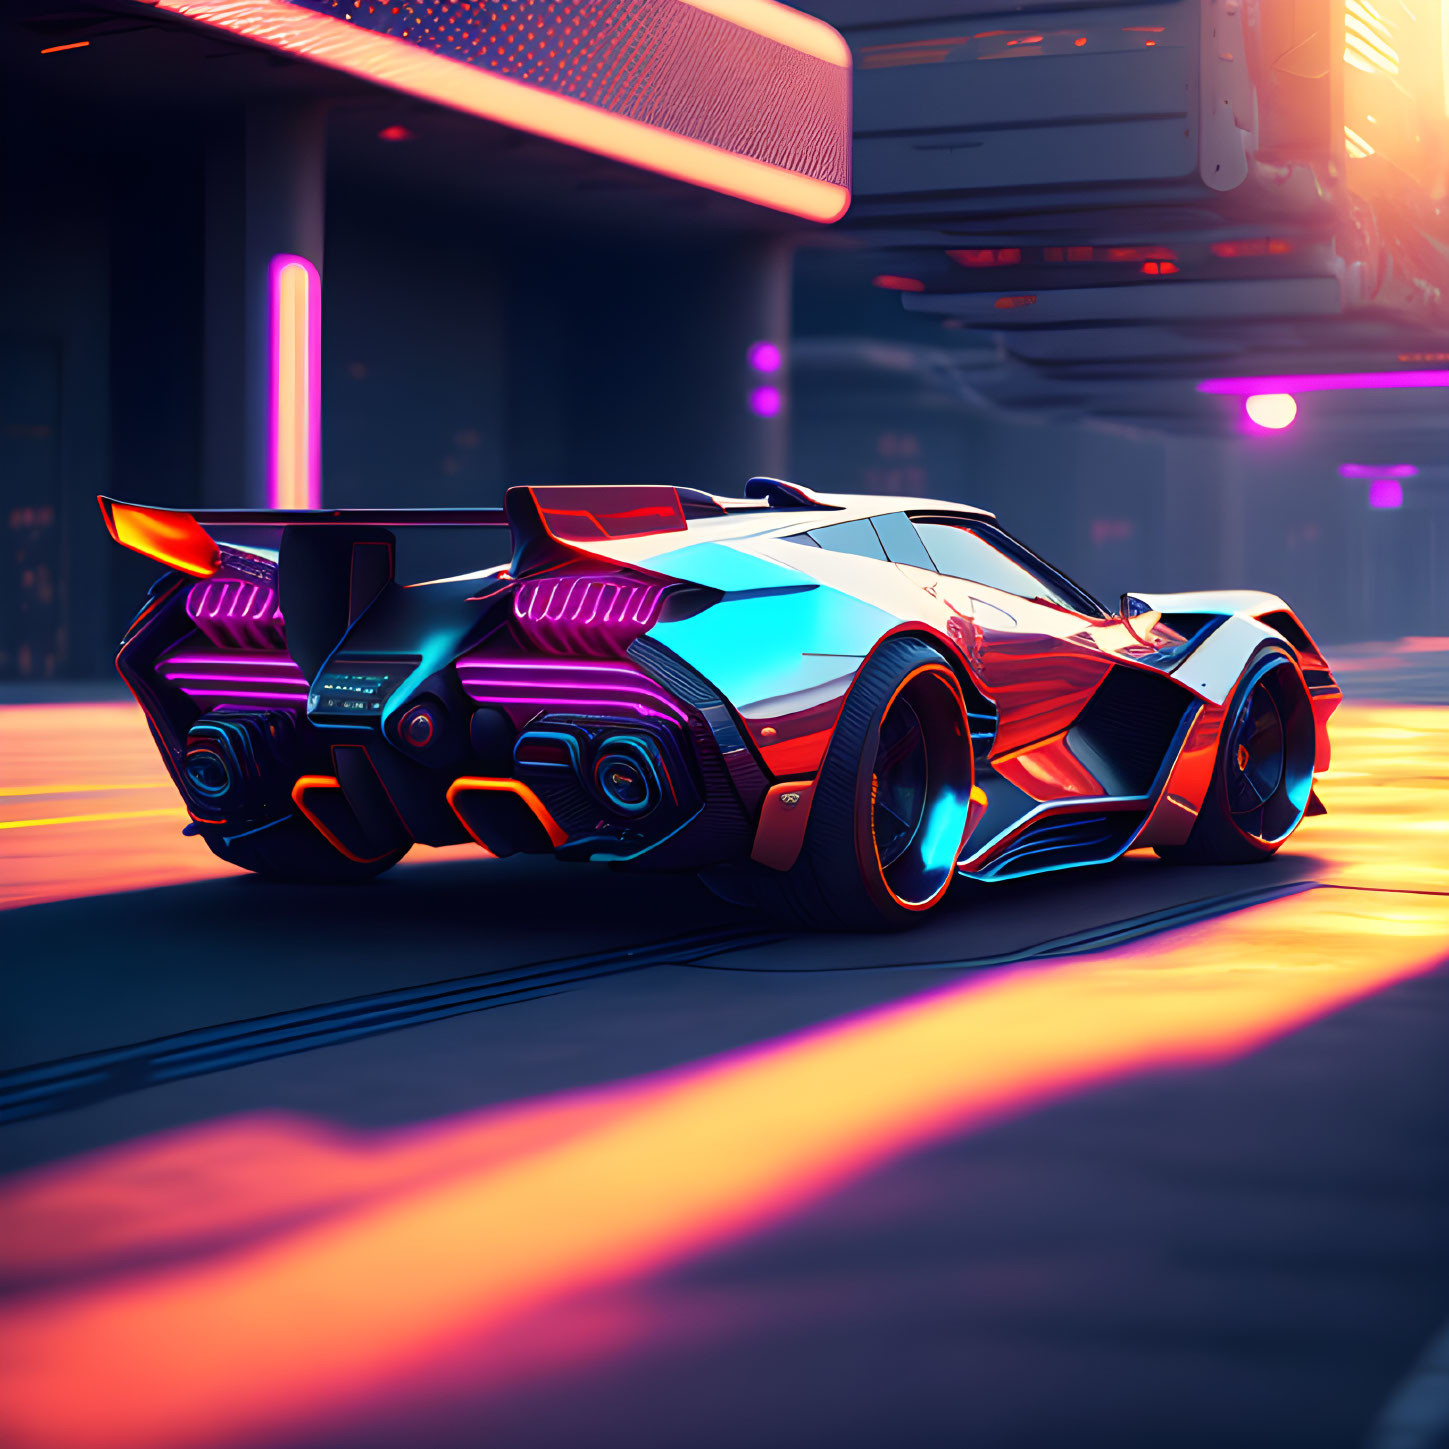 Futuristic car with neon accents on glowing city street